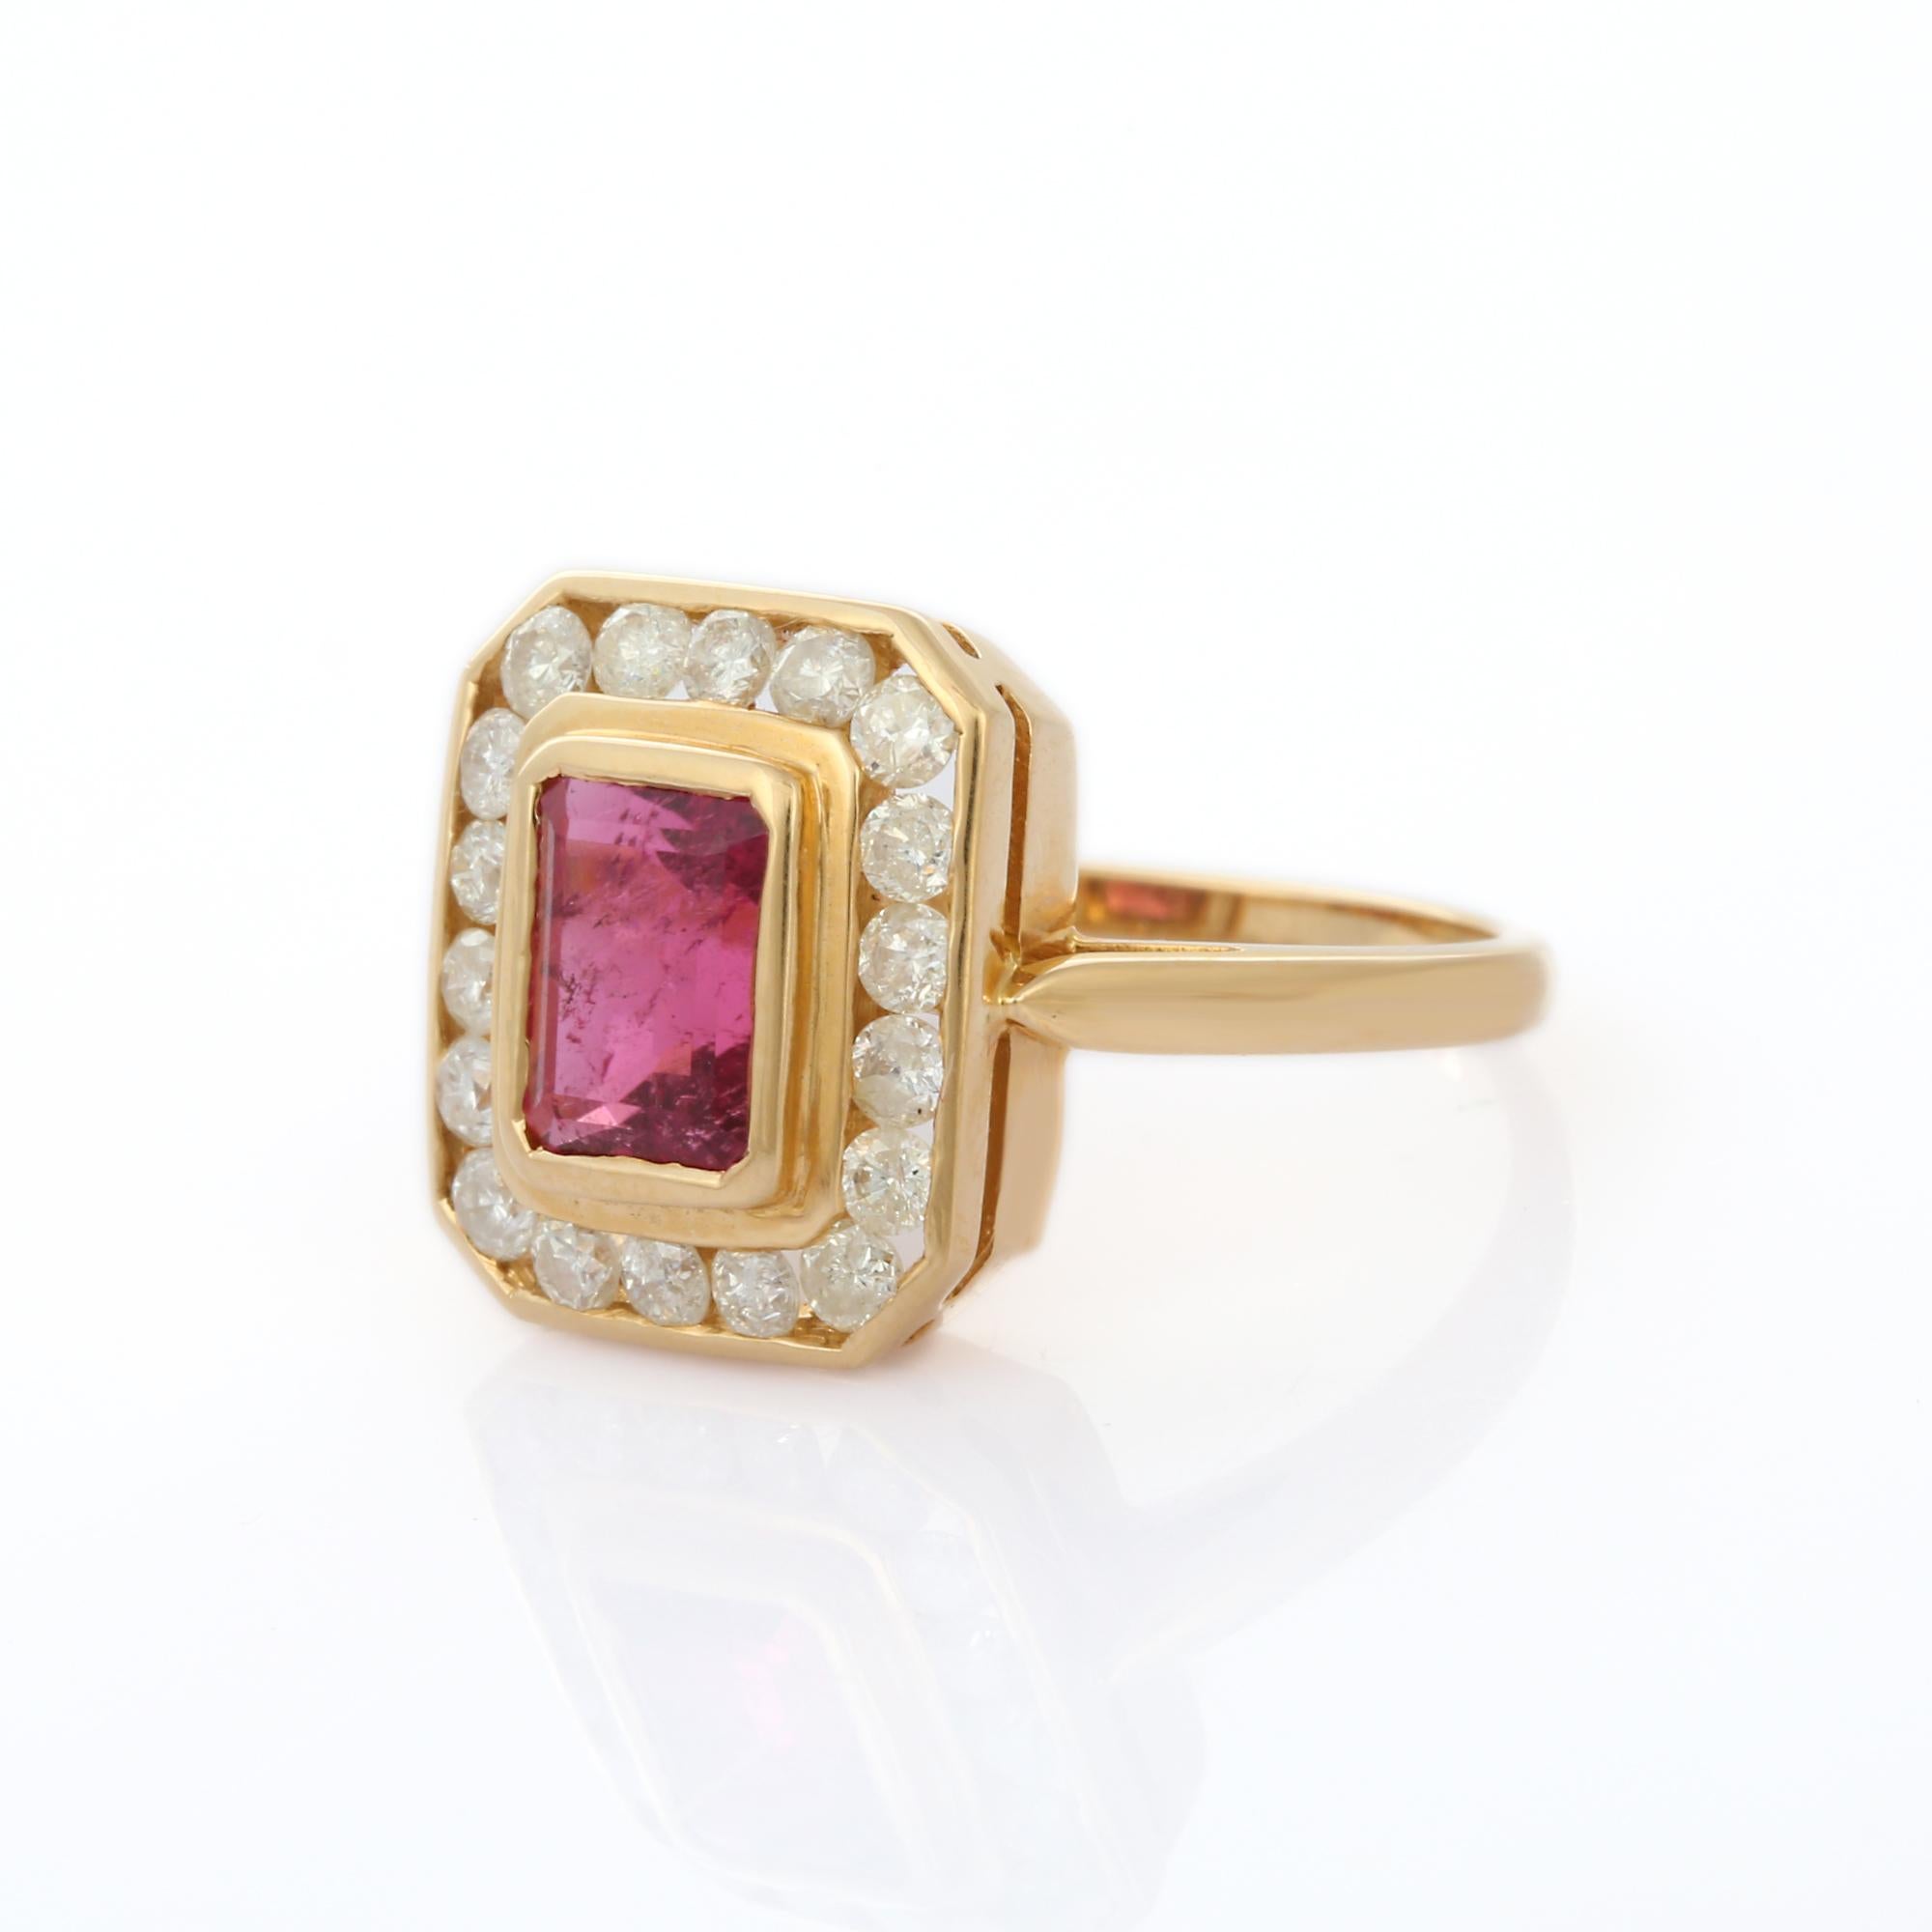 For Sale:  18K Yellow Gold Octagon Cut Ruby Diamond Engagement Ring 4